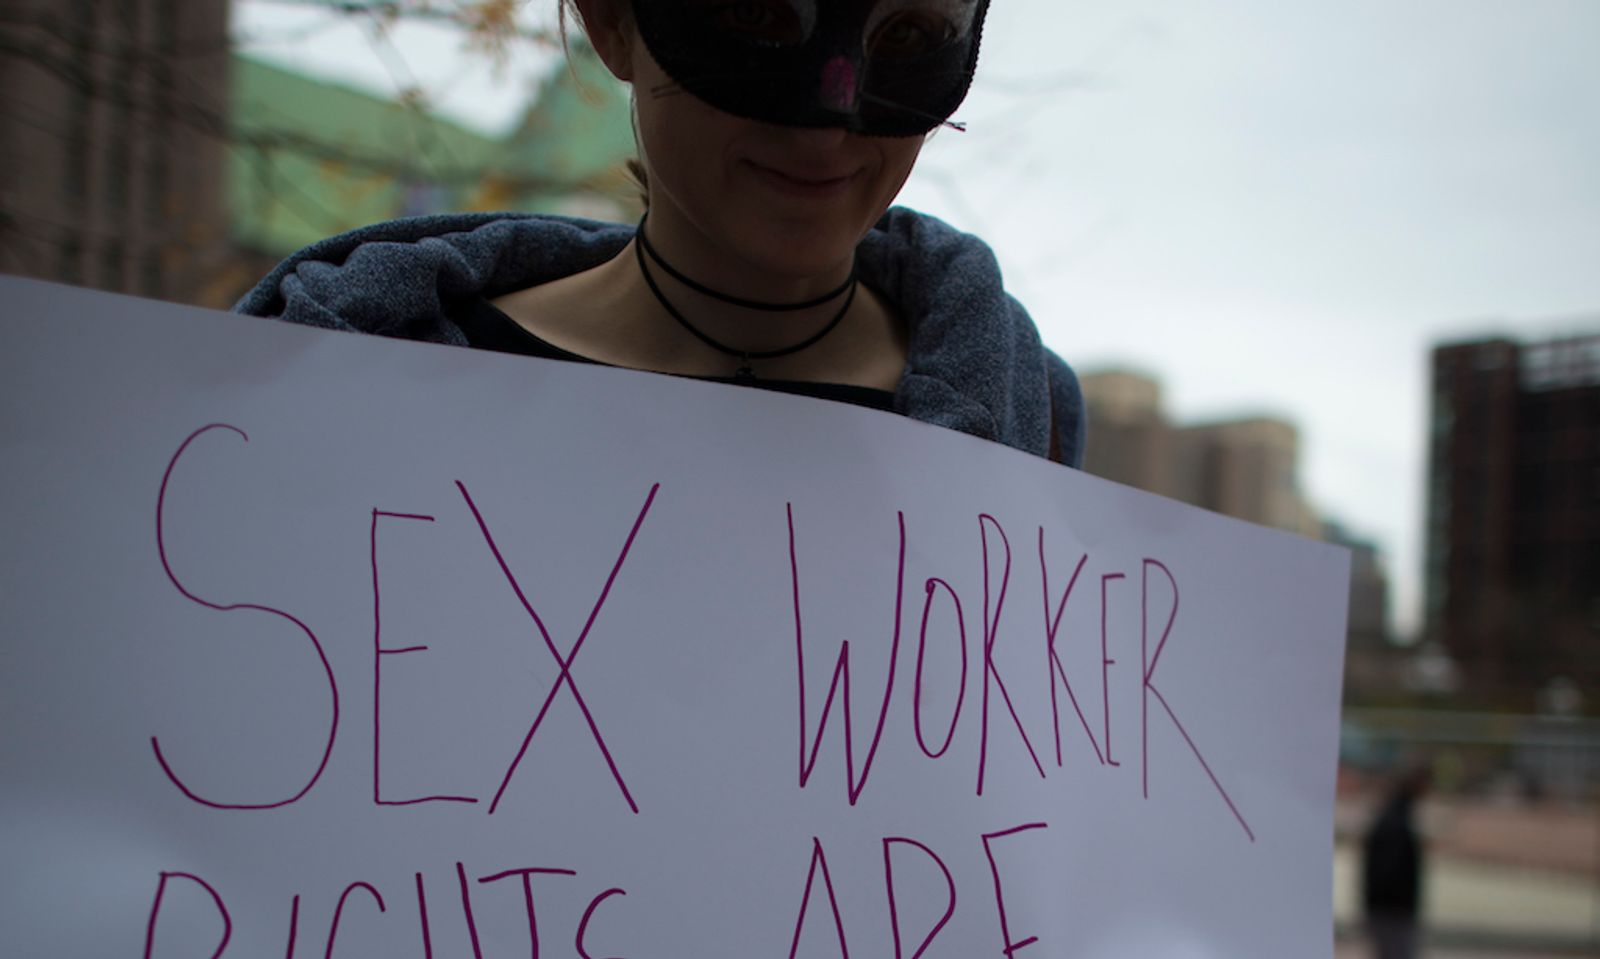 Sex Workers Discover New Political Clout, Rolling Stone Reports